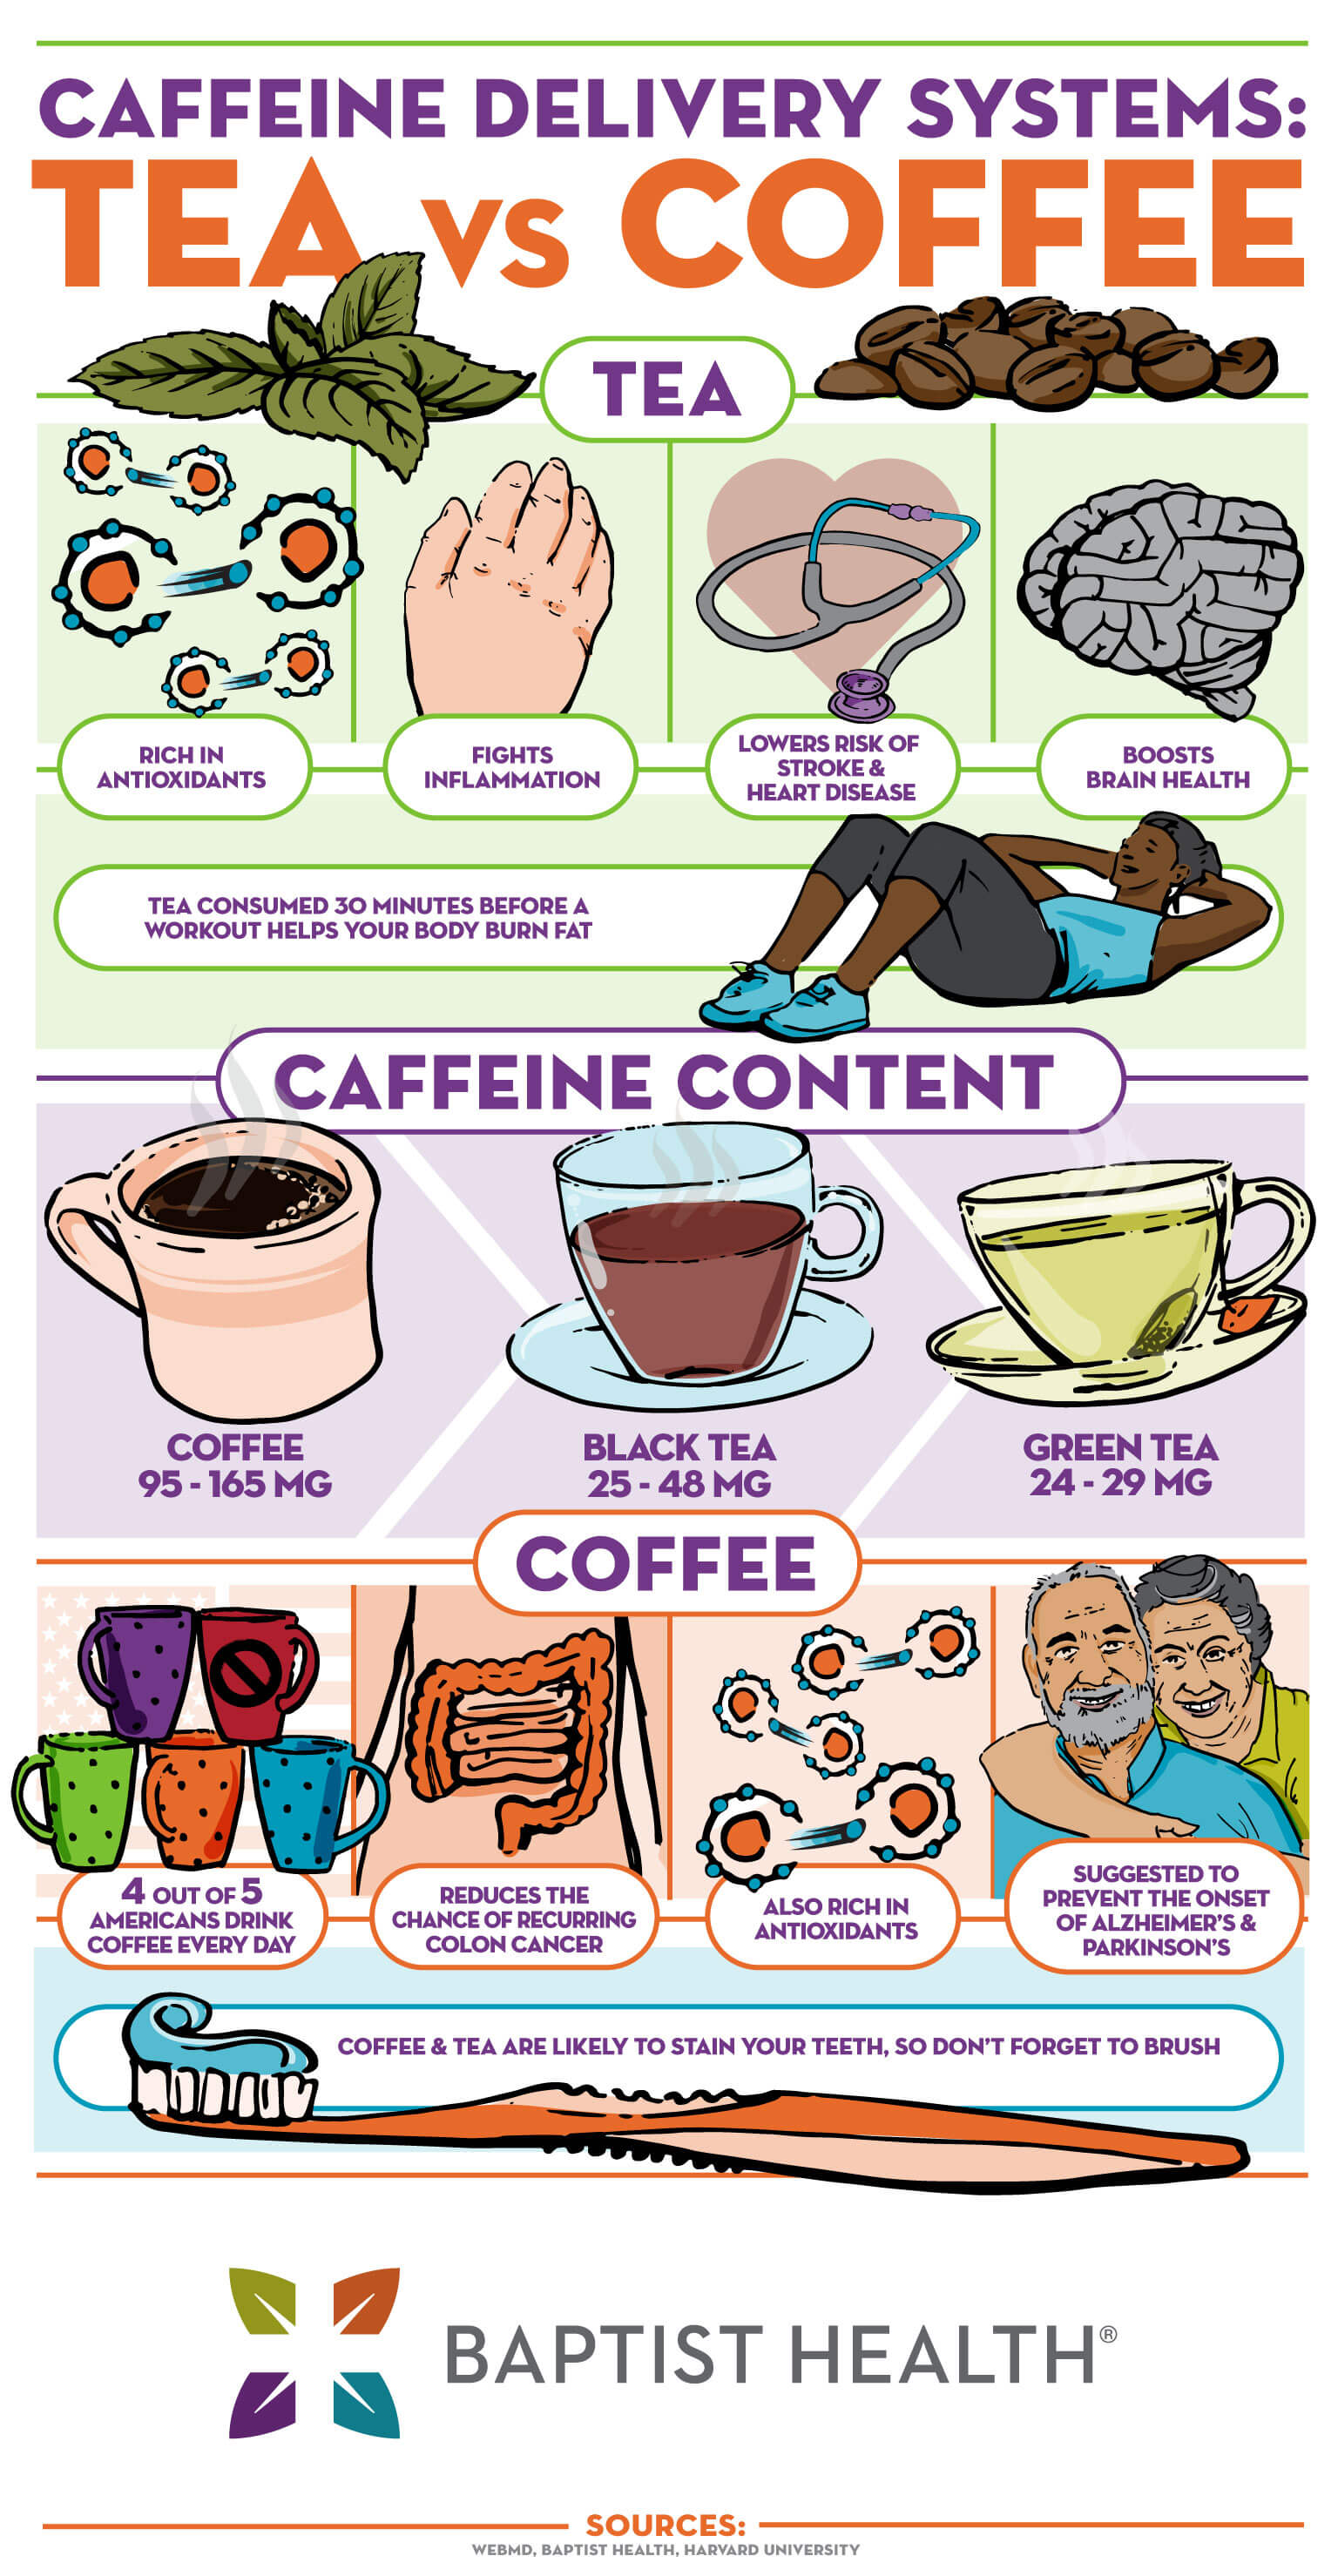 Tea vs Coffee - Why Can't We All Just Get Along?